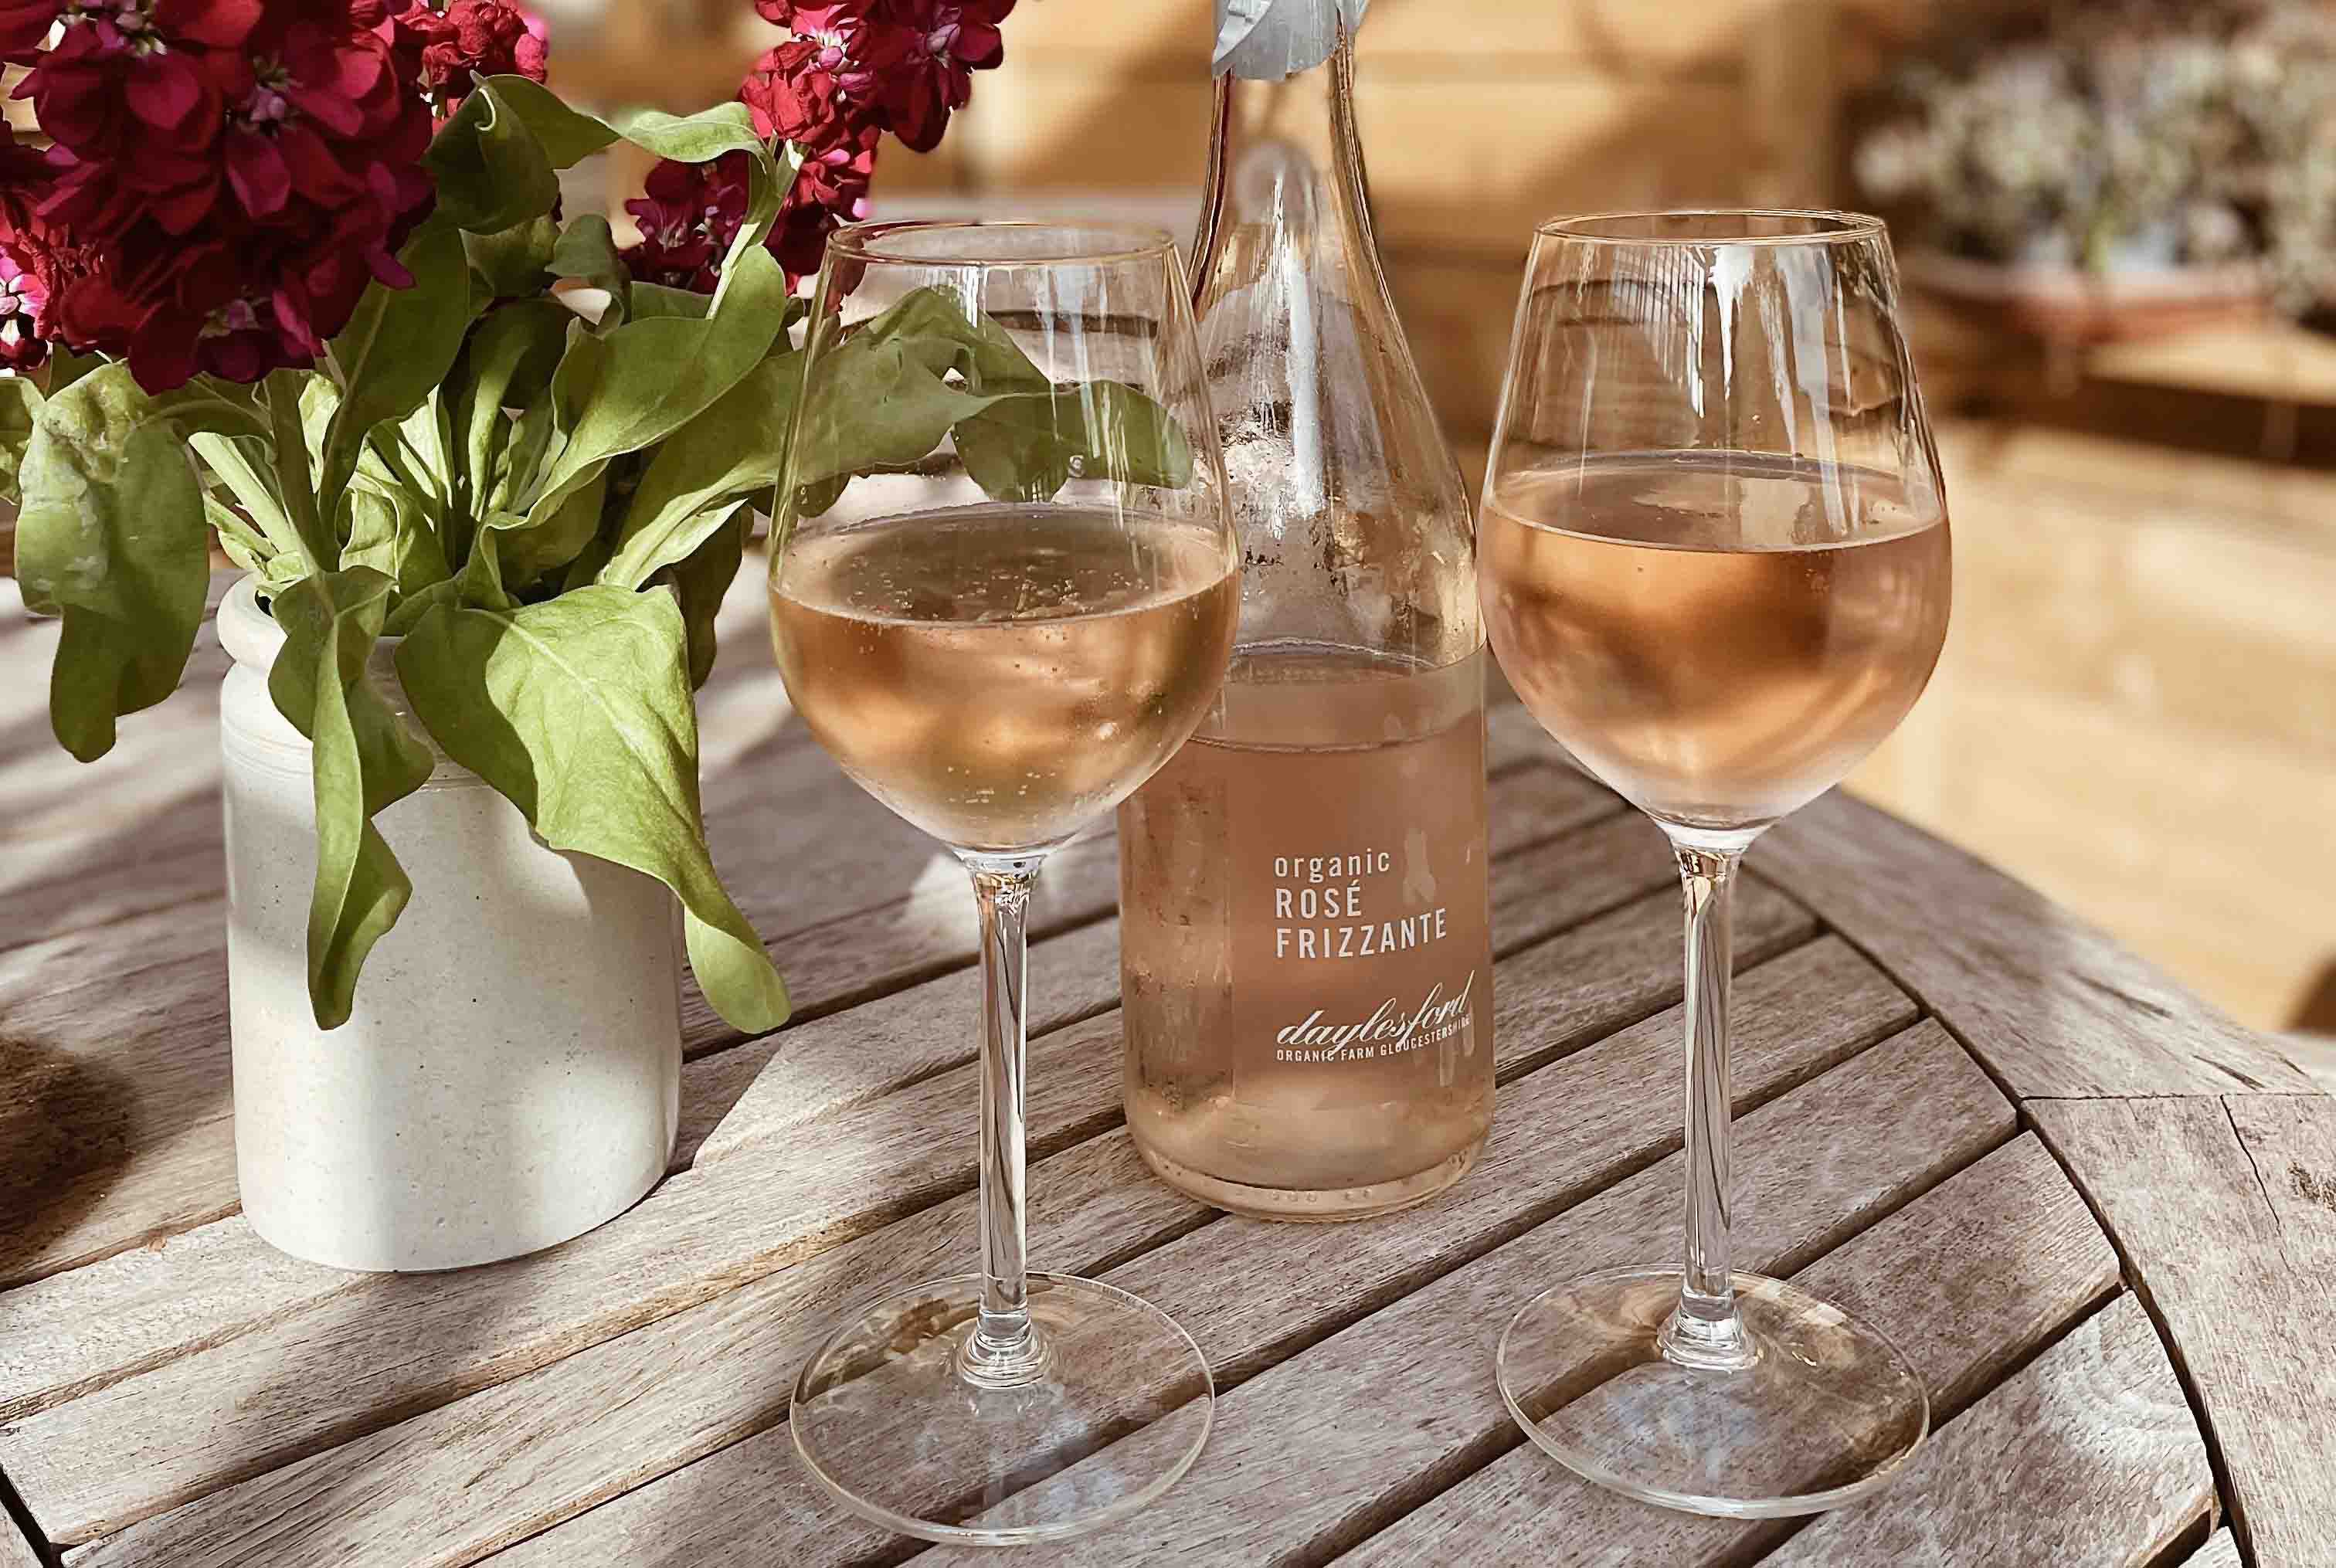 Two chilled glasses of Daylesford Rose Frizzante